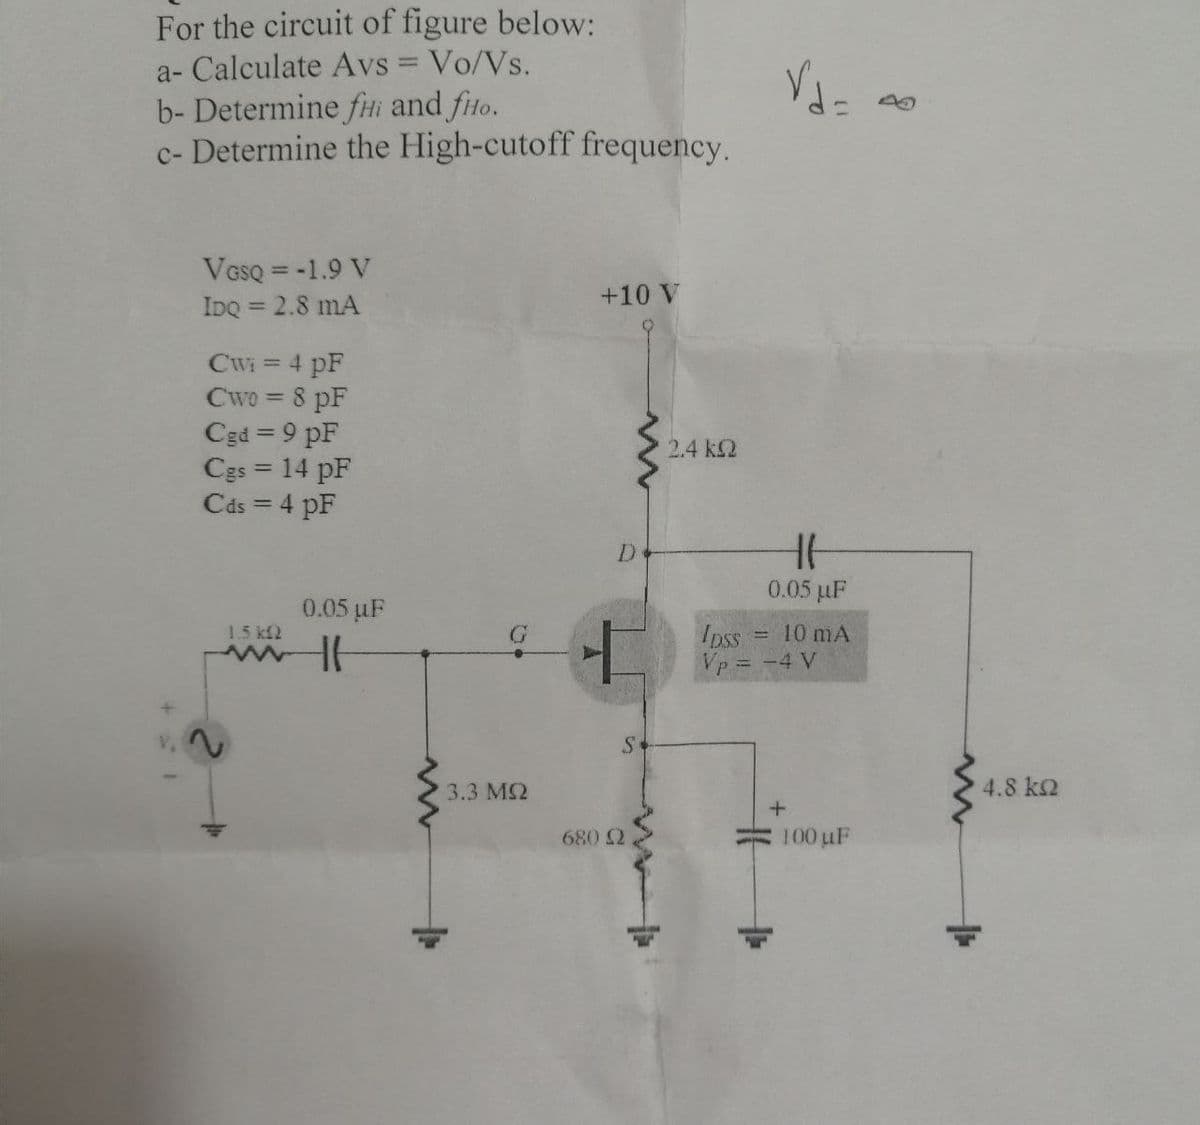 For the circuit of figure below:
a- Calculate Avs = Vo/Vs.
b- Determine fHi and fio.
c- Determine the High-cutoff frequency.
V,
VGSQ = -1.9 V
IDQ = 2.8 mA
Cwi = 4 pF
Cwo = 8 pF
Cgd=9 pF
Cgs = 14 pF
Cds = 4 pF
1.5 kf2
0.05 µF
HH
3.3 MS2
+10 V
www
D
+
S
680 2
2.4 kQ
Vd=a
HH
0.05 µF
Ipss
Vp = -4 V
10 mA
+
100 µF
4.8 ΚΩ